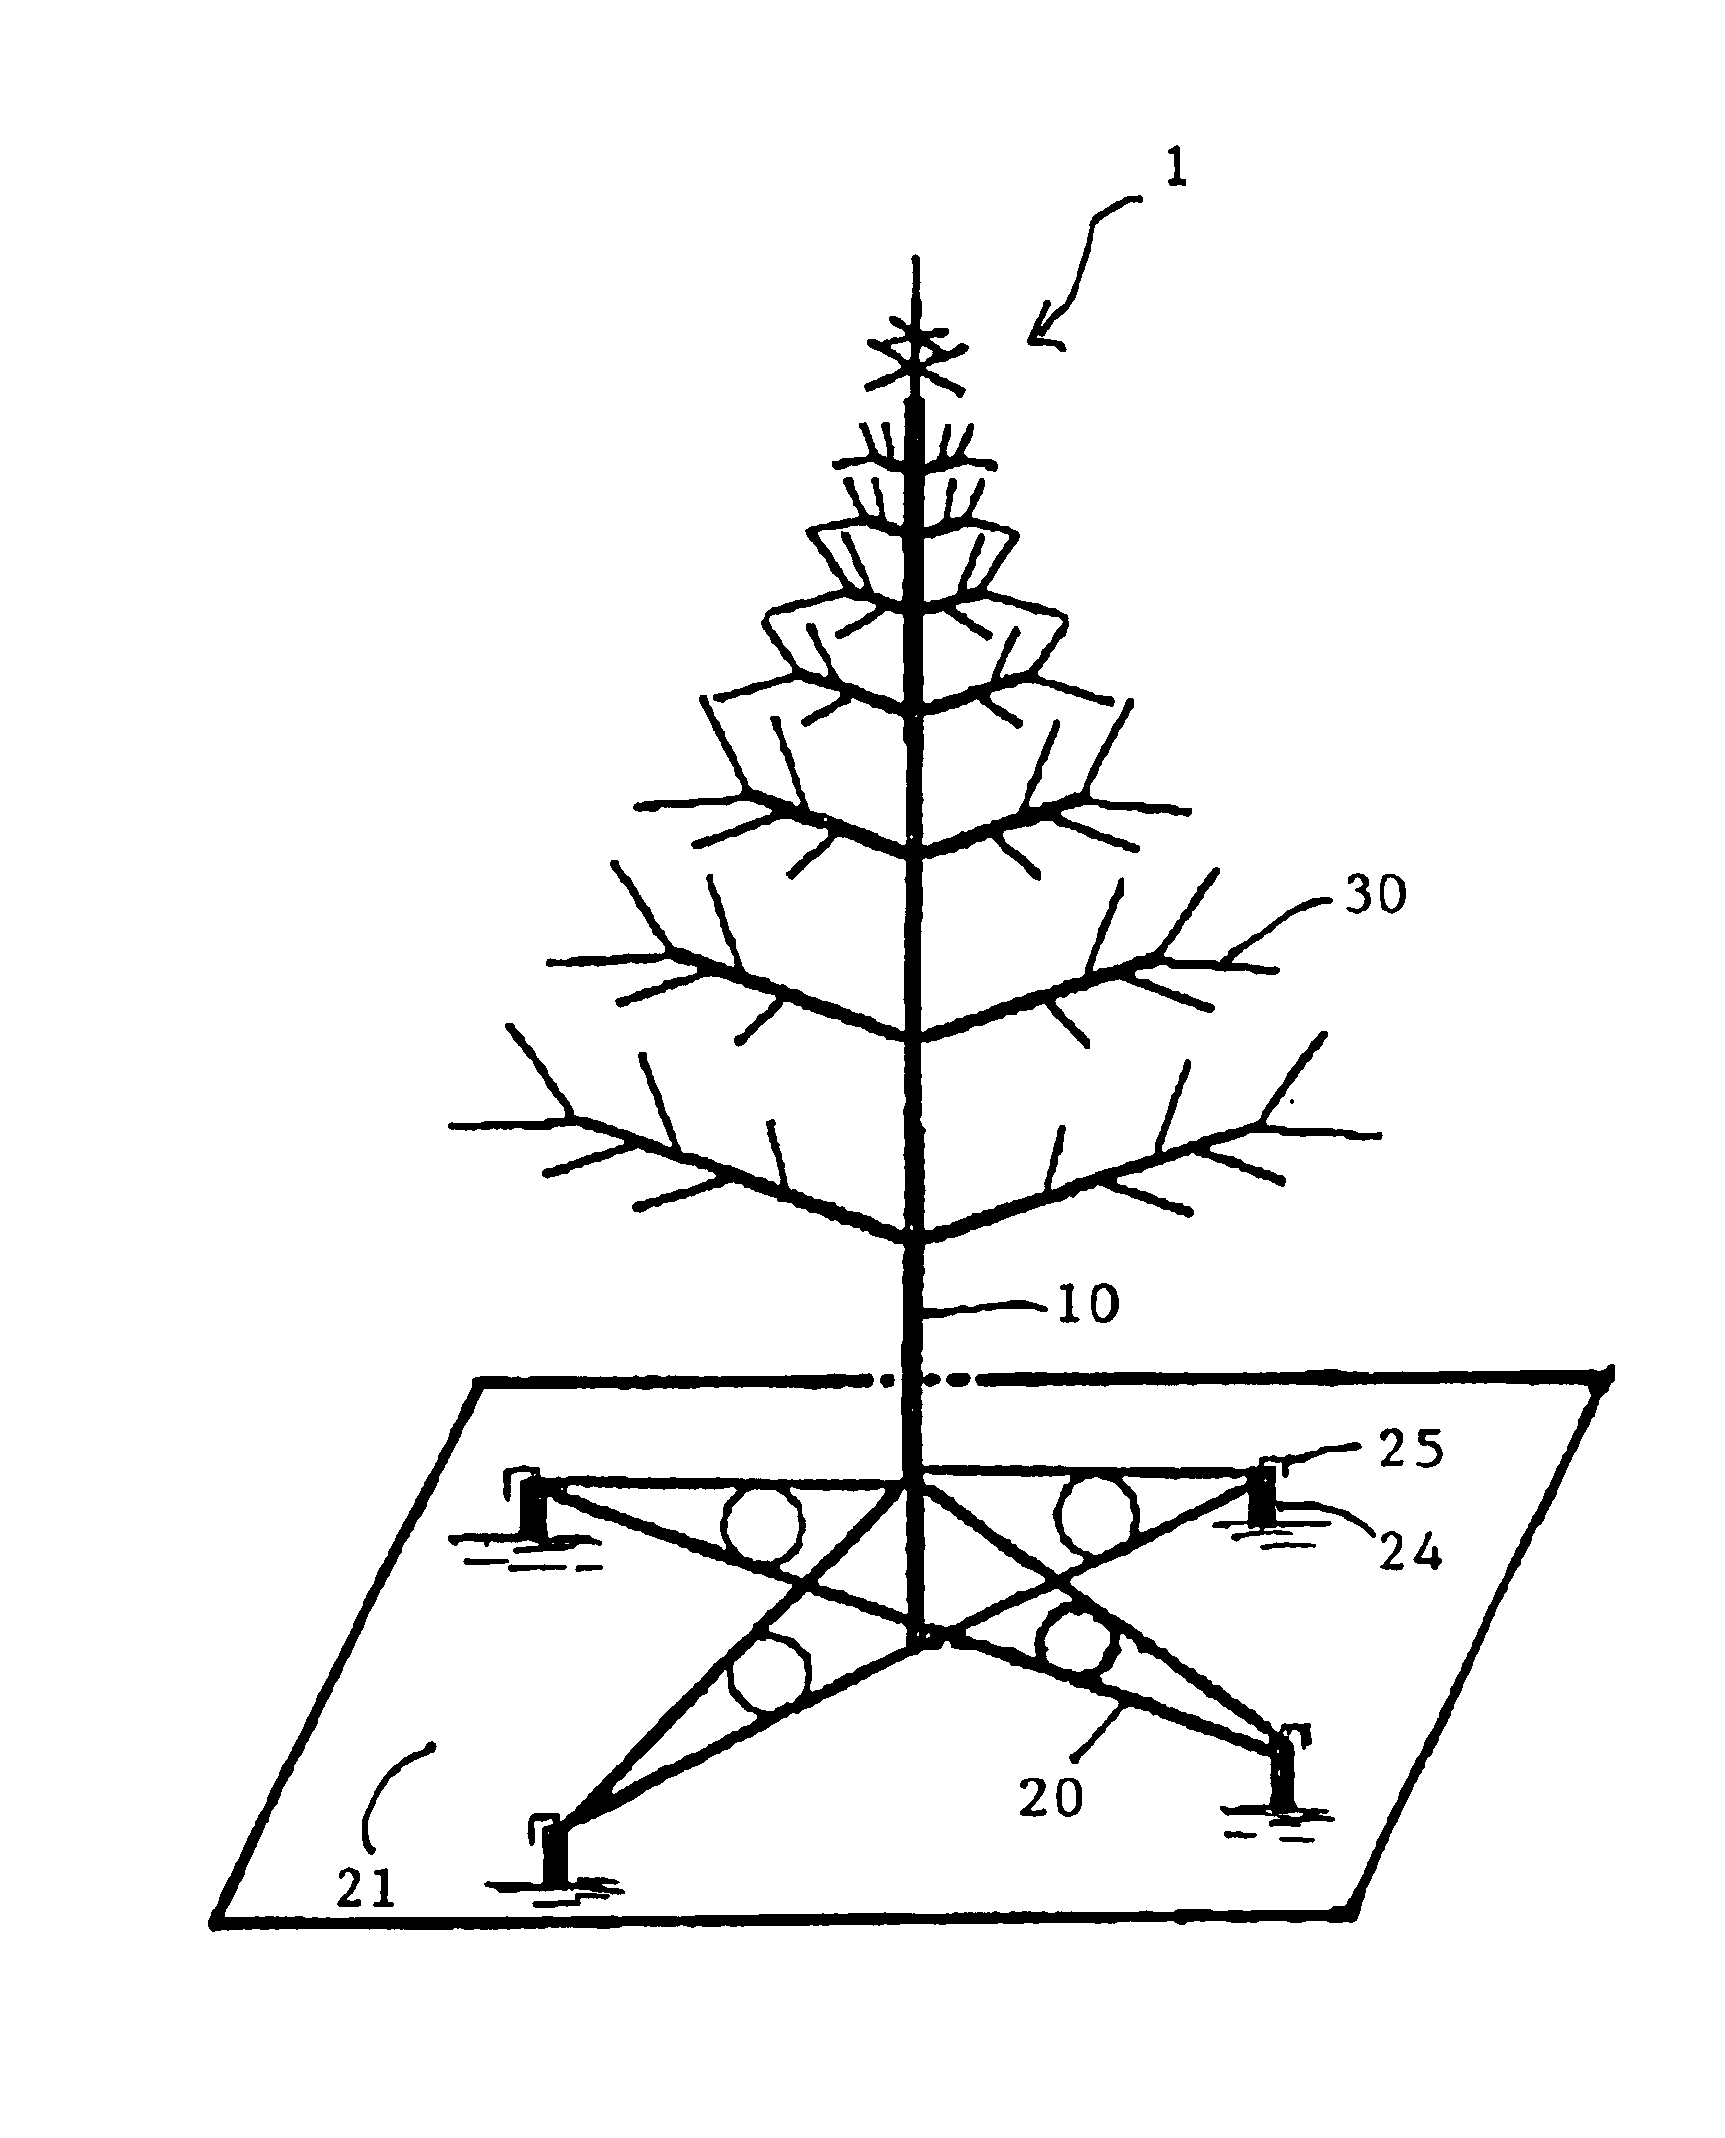 Decorative light strings with combinative tree